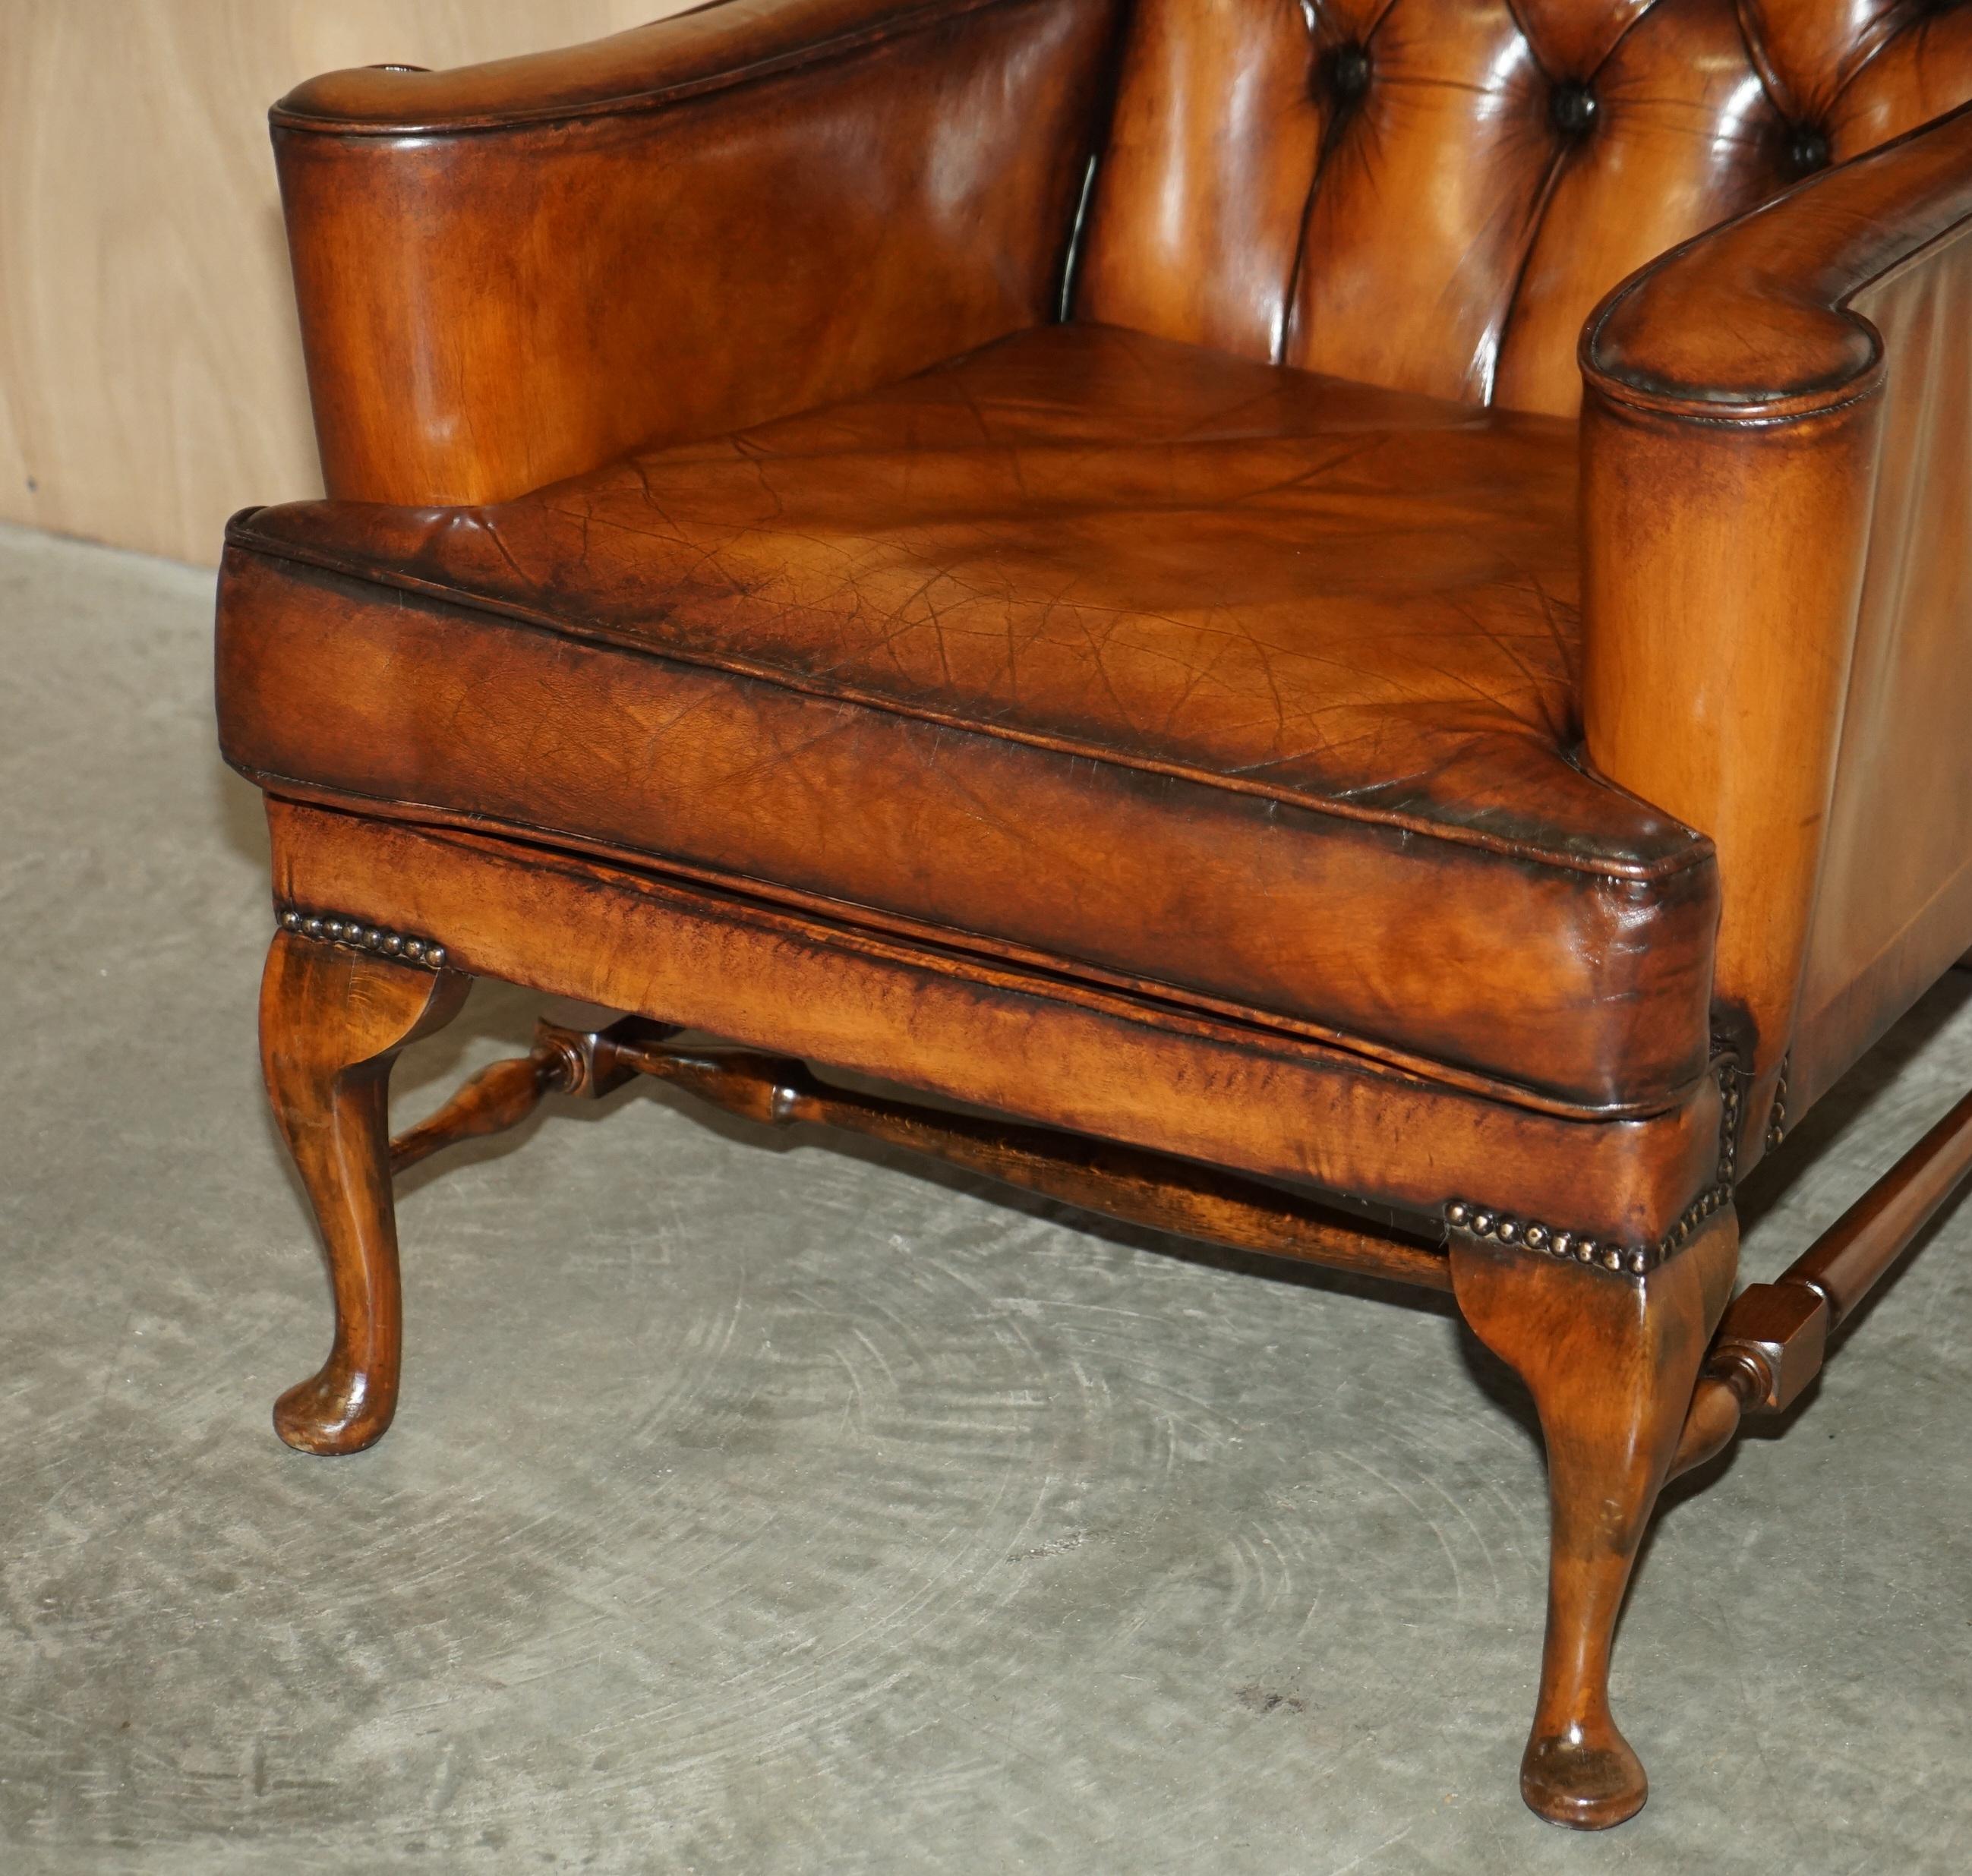 Edwardian PAIR OF ANTIQUE WILLIAM MORRIS WiNGBACK ARMCHAIRS HAND DYED CIGAR BROWN LEATHER For Sale